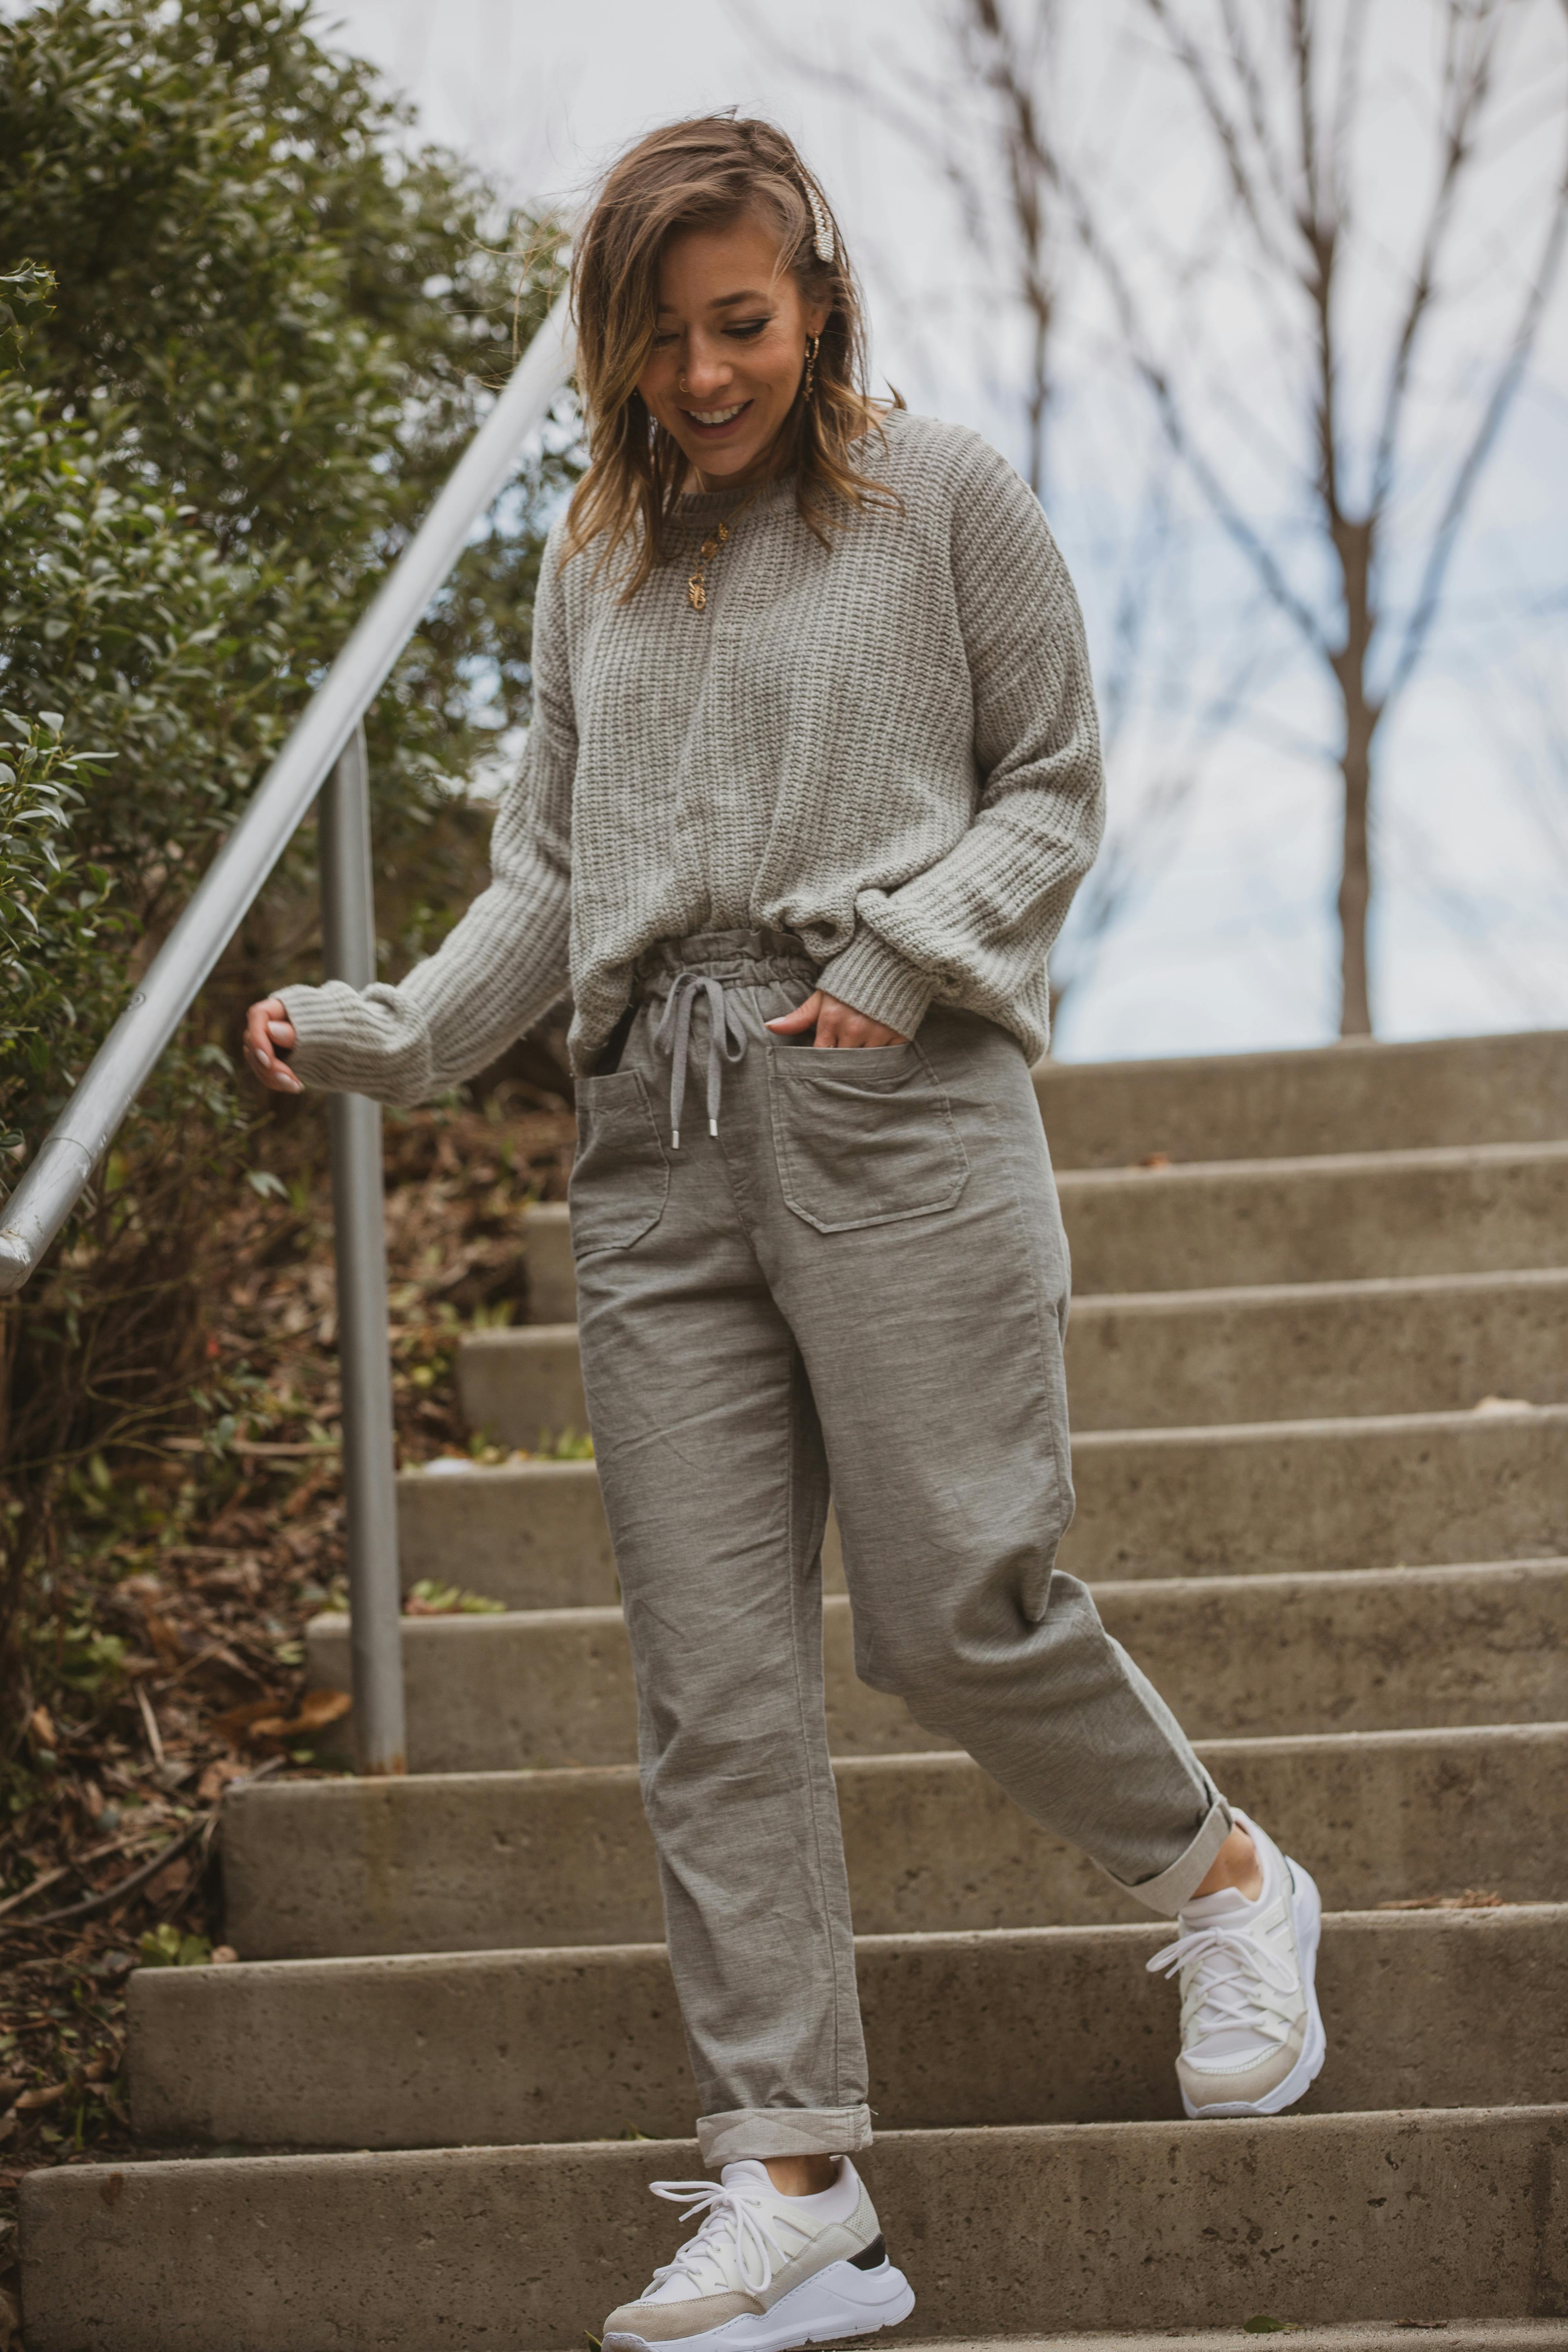 Woman In Grey Sweater And Grey Bottoms Walking Down Stairs · Free